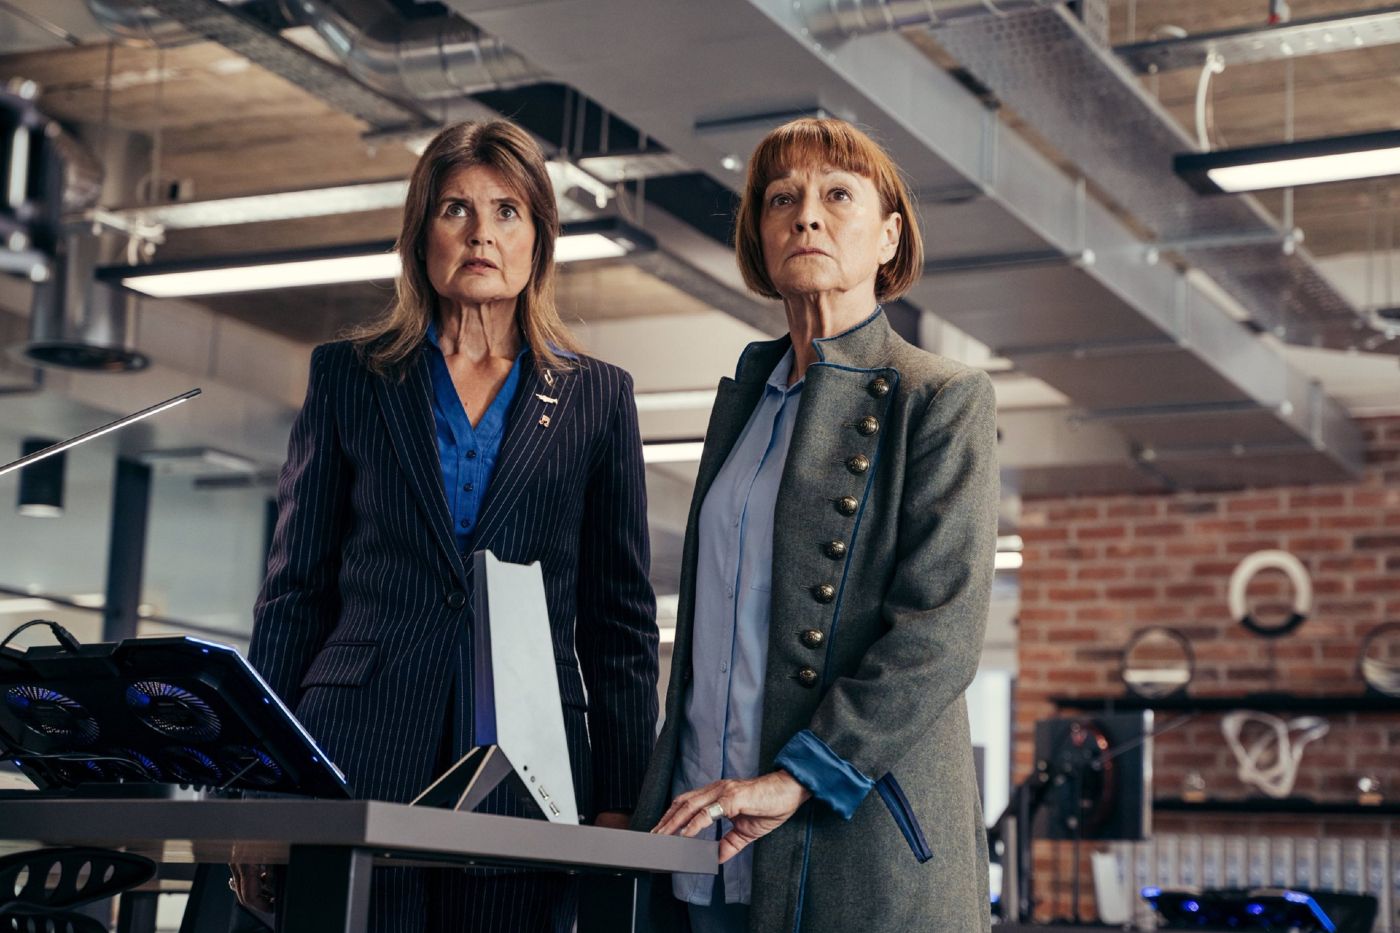 Classic Doctor Who Companions Tegan & Ace Return in New Image